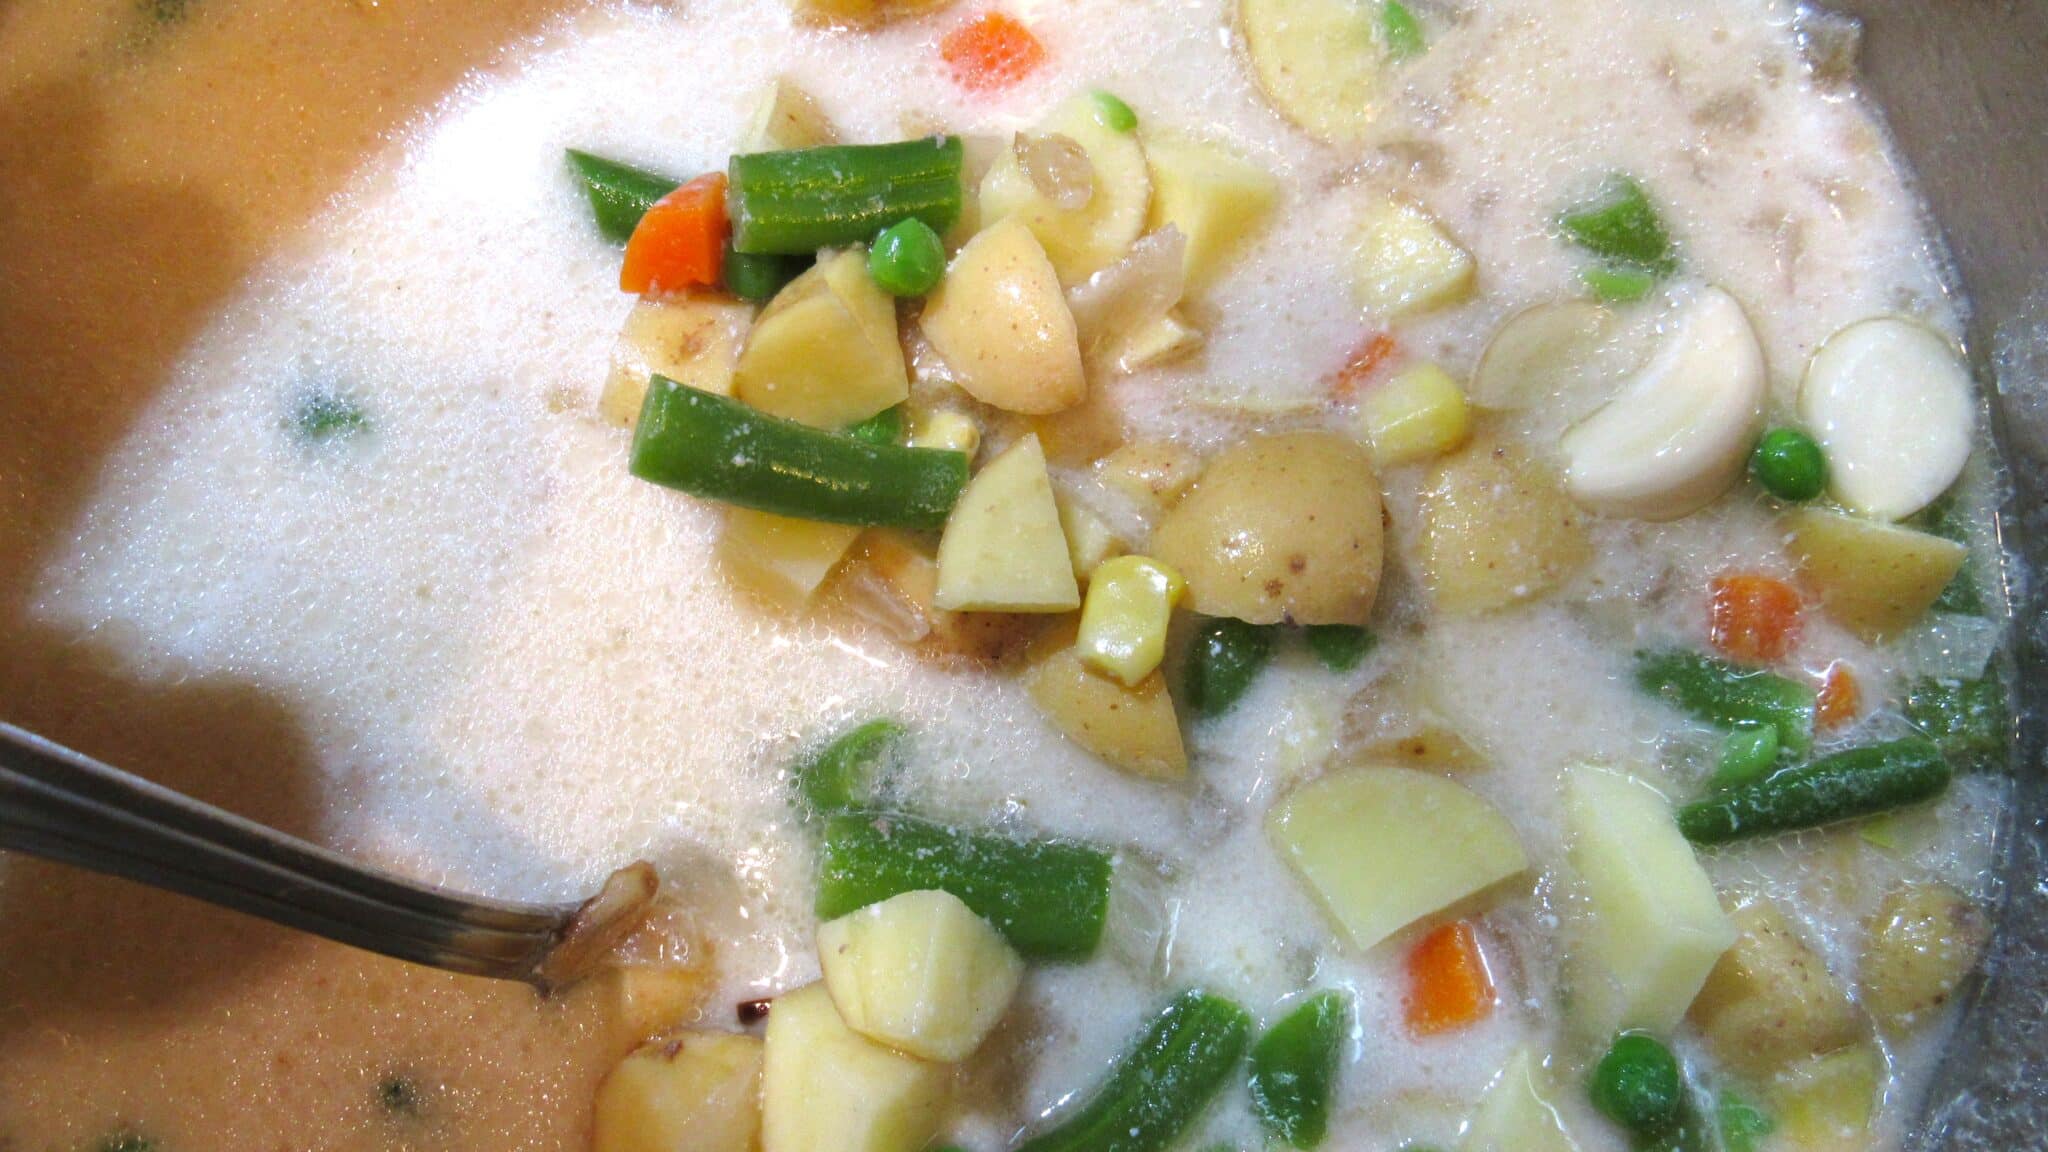 Close-up image of the soup ingredients mixed and ready to cook.